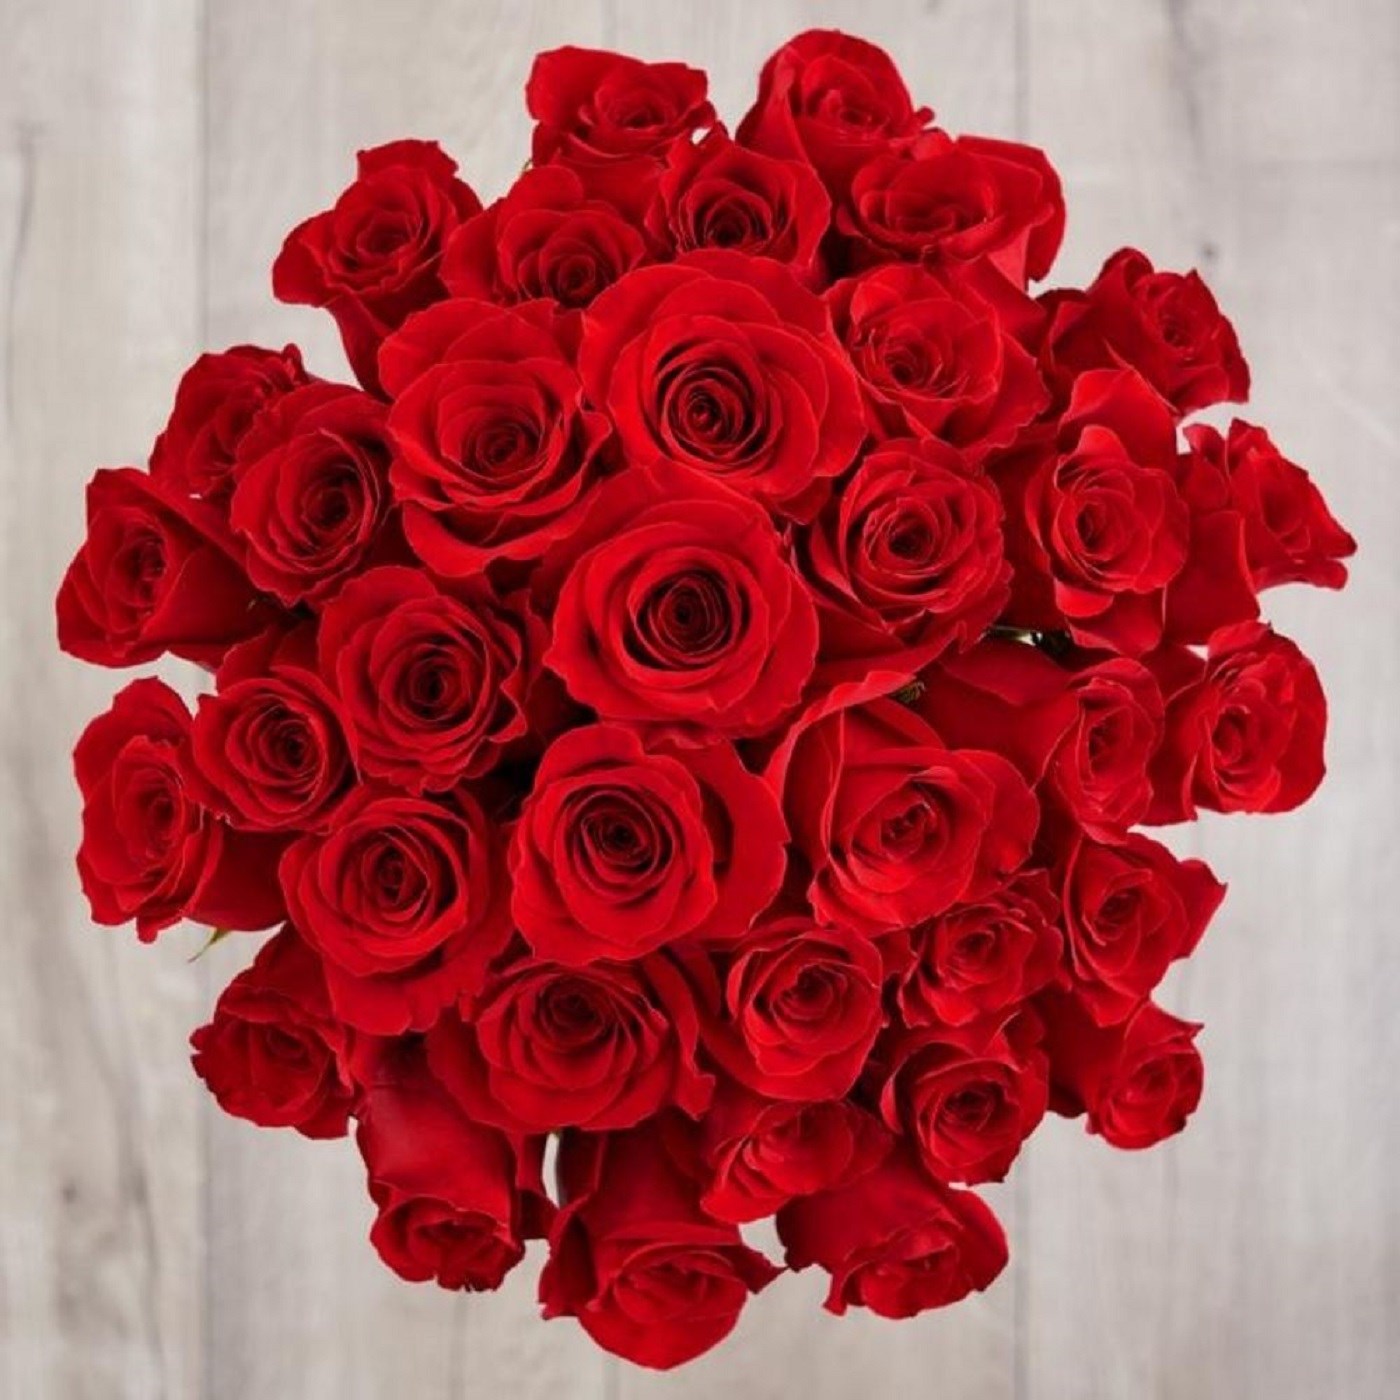 36 Red Roses Bunch